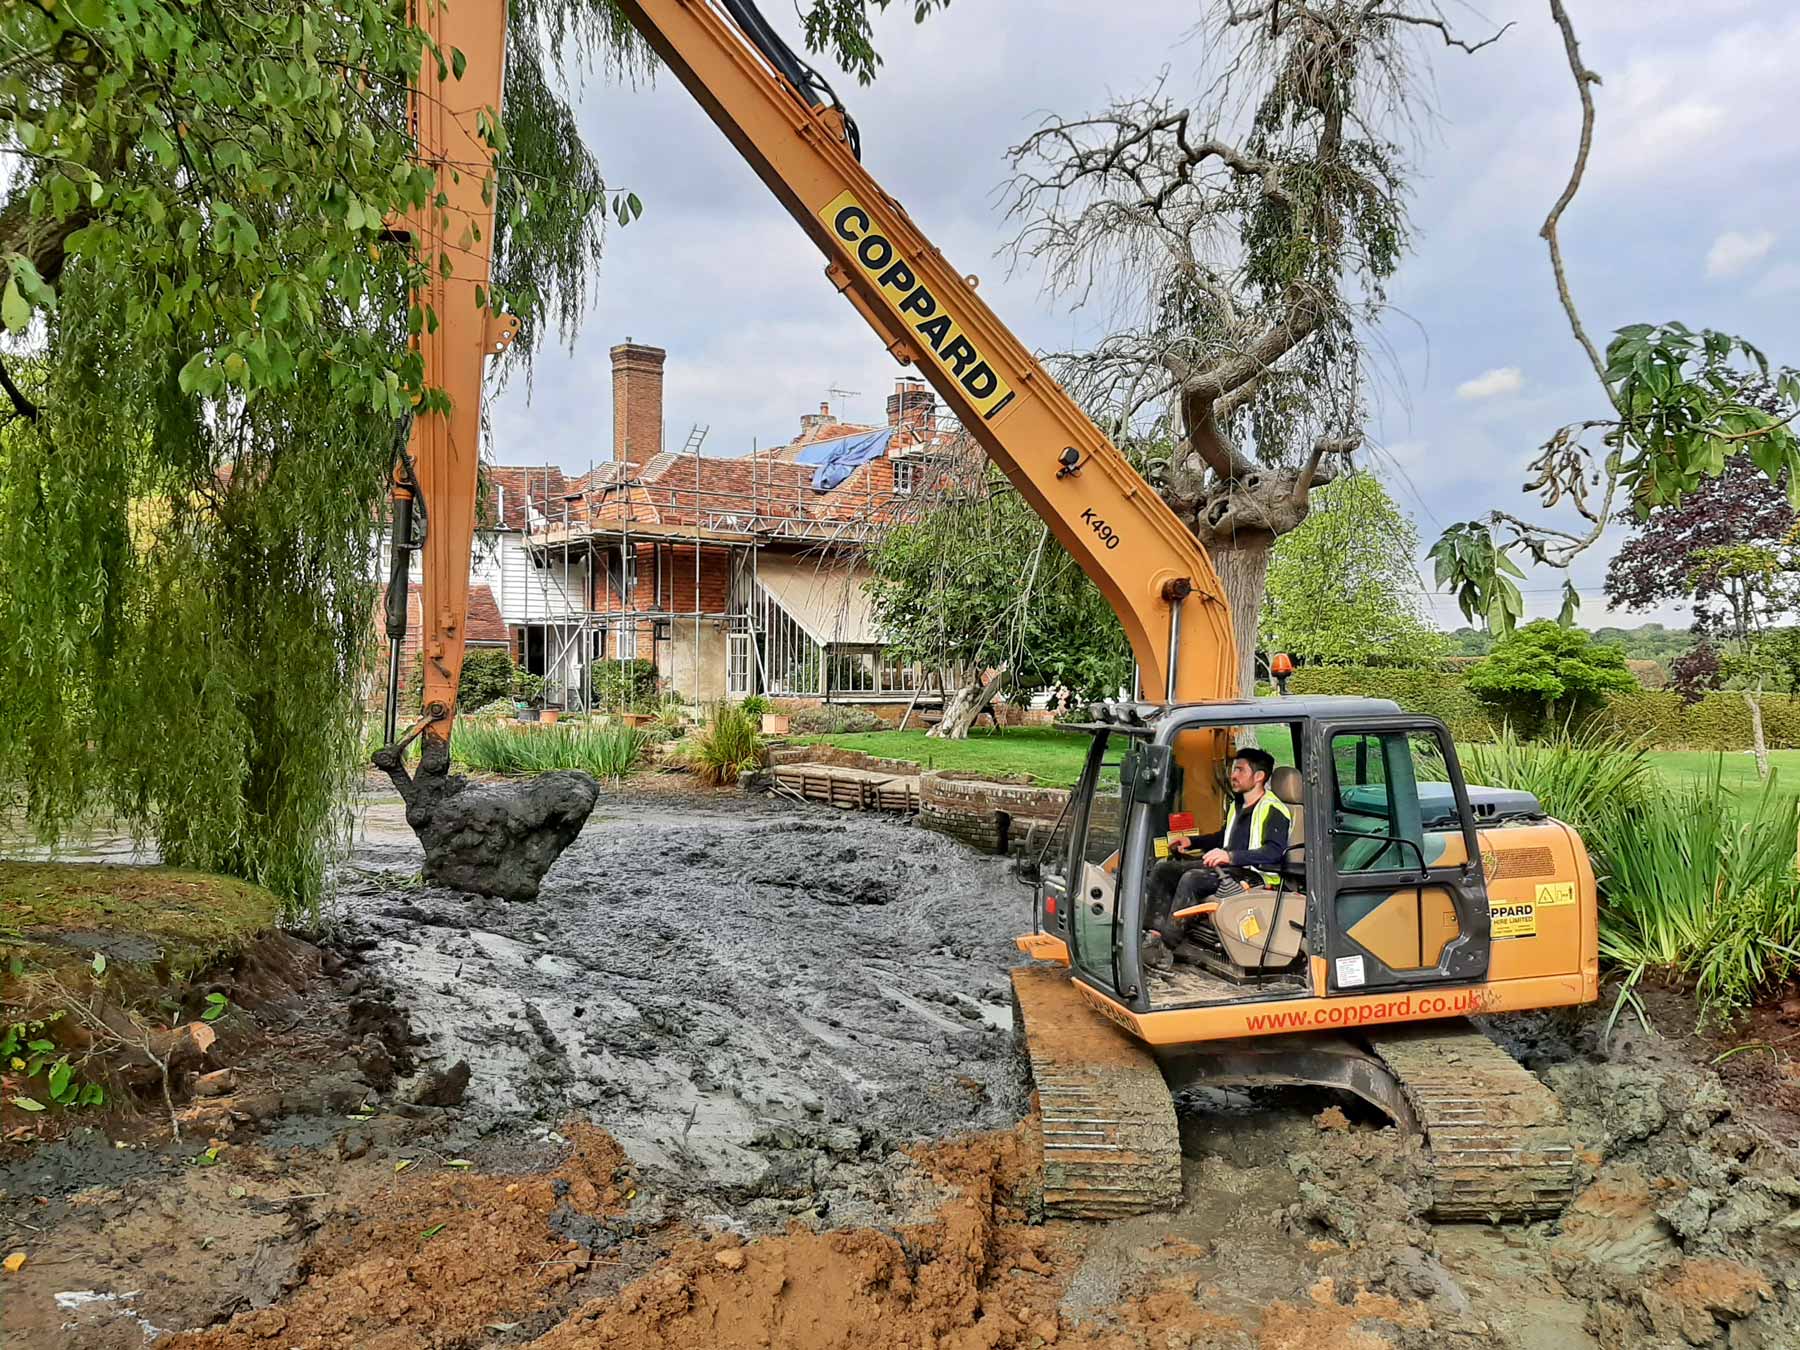 Waterlands build, restore and repair lakes, ponds and water features: Pond de-silt, Tenterden.